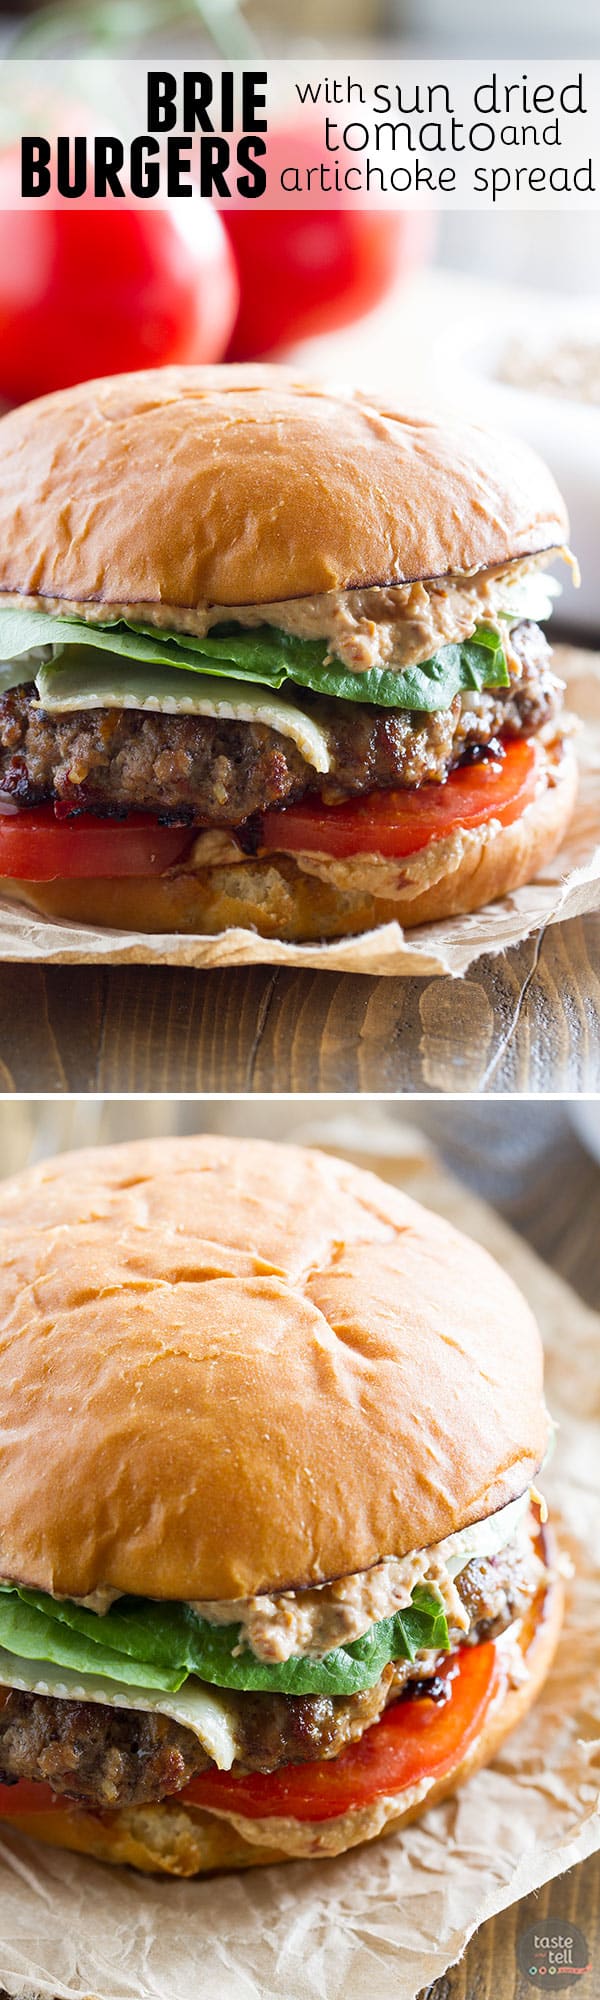 Burgers go gourmet with this Brie Burger with Sun-Dried Tomato and Artichoke Spread.  A flavorful burger patty is topped with melty brie cheese, and the sun-dried tomato and artichoke spread gives this burger a wow factor!